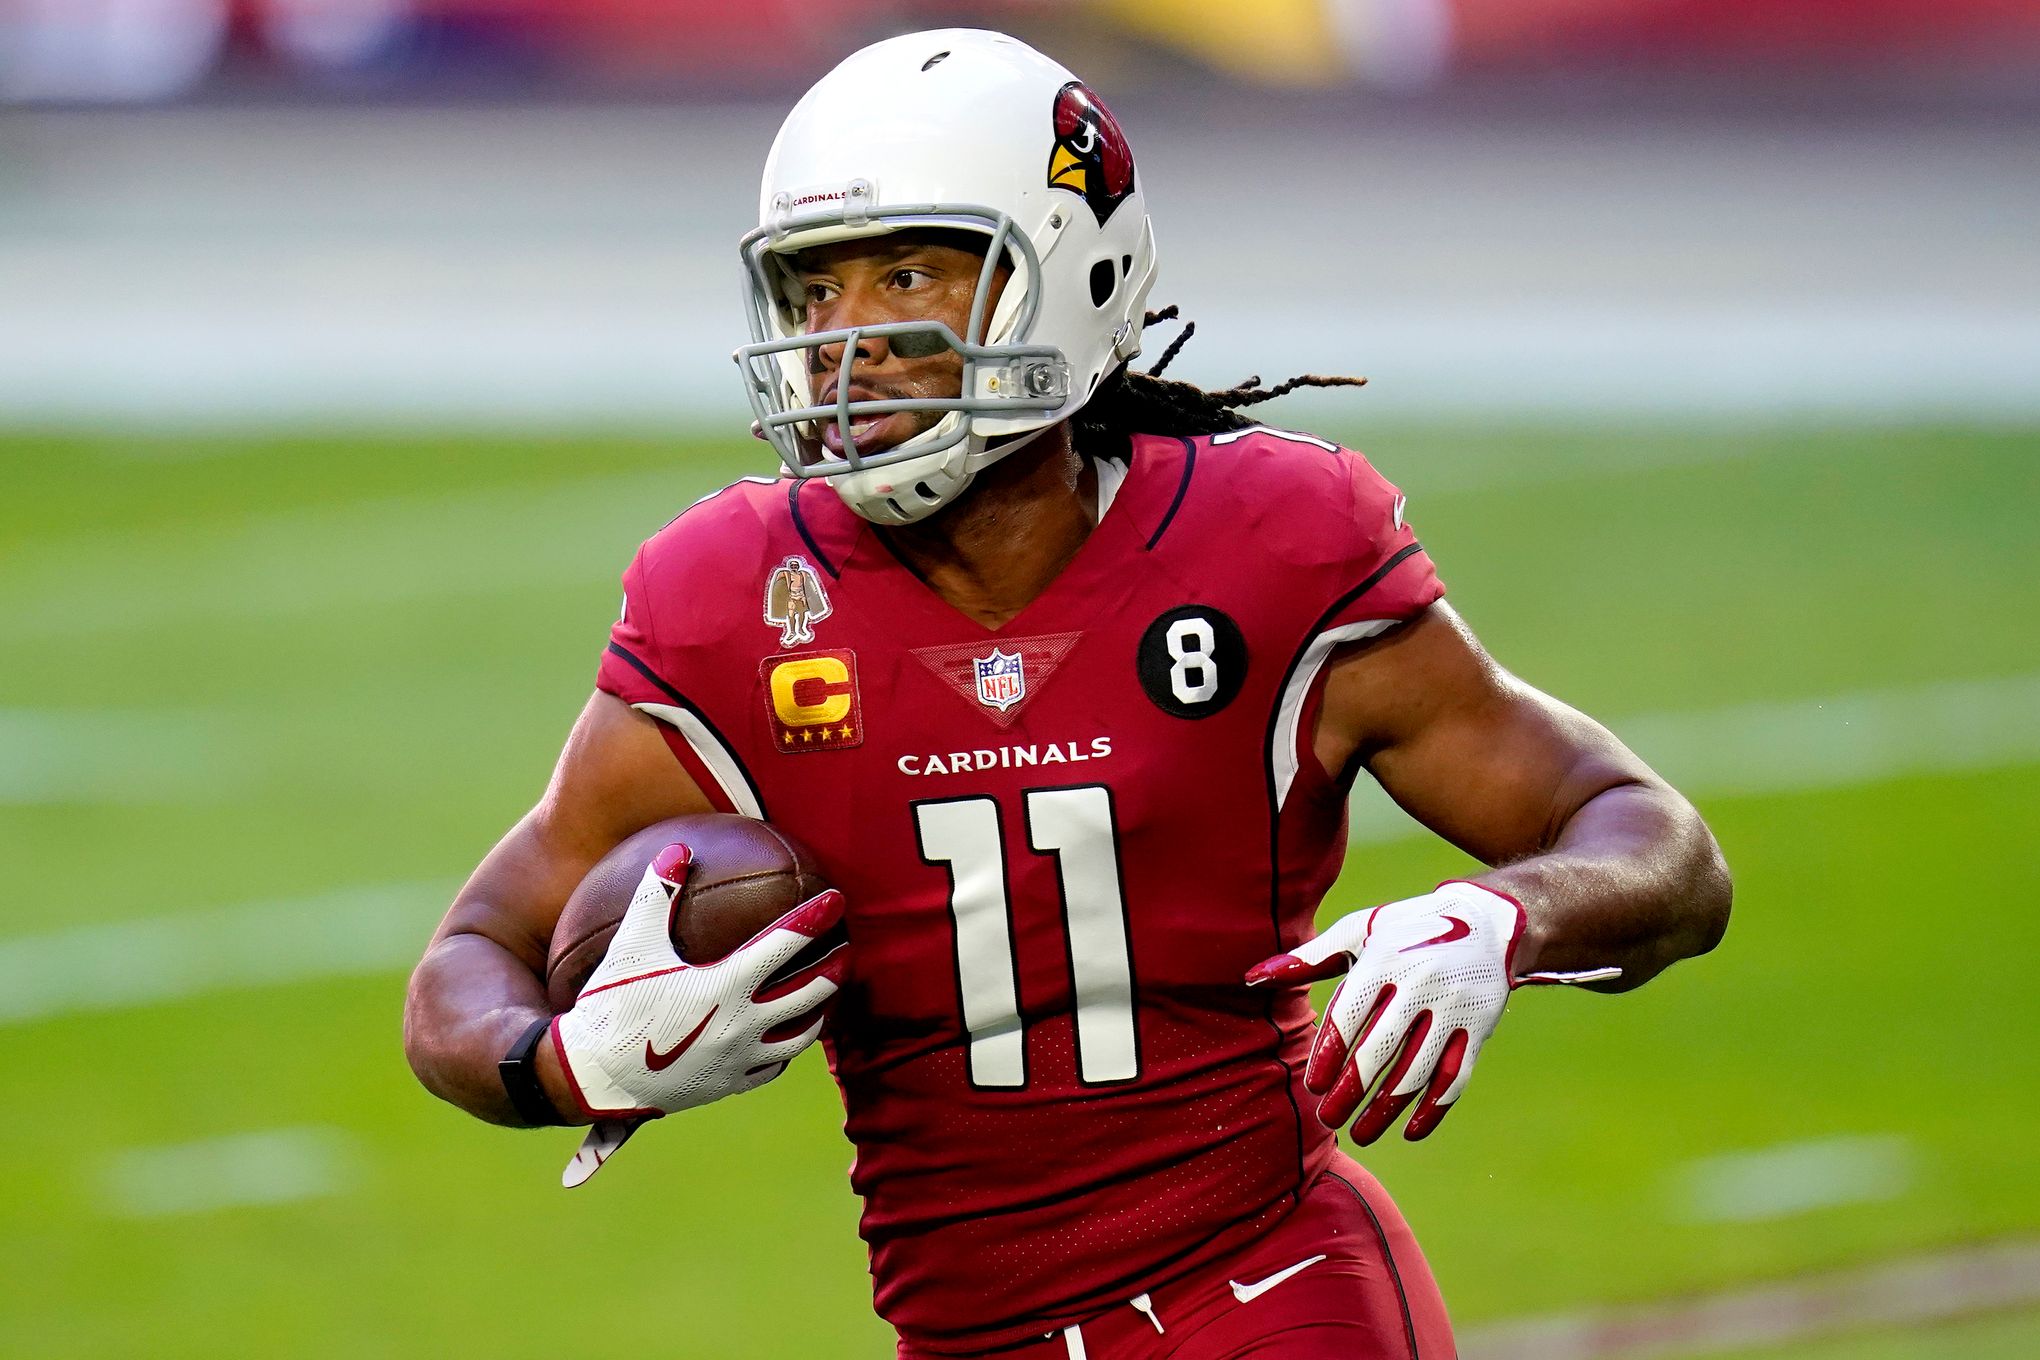 Larry Fitzgerald details life in quarantine with COVID-19 as tough, but  productive